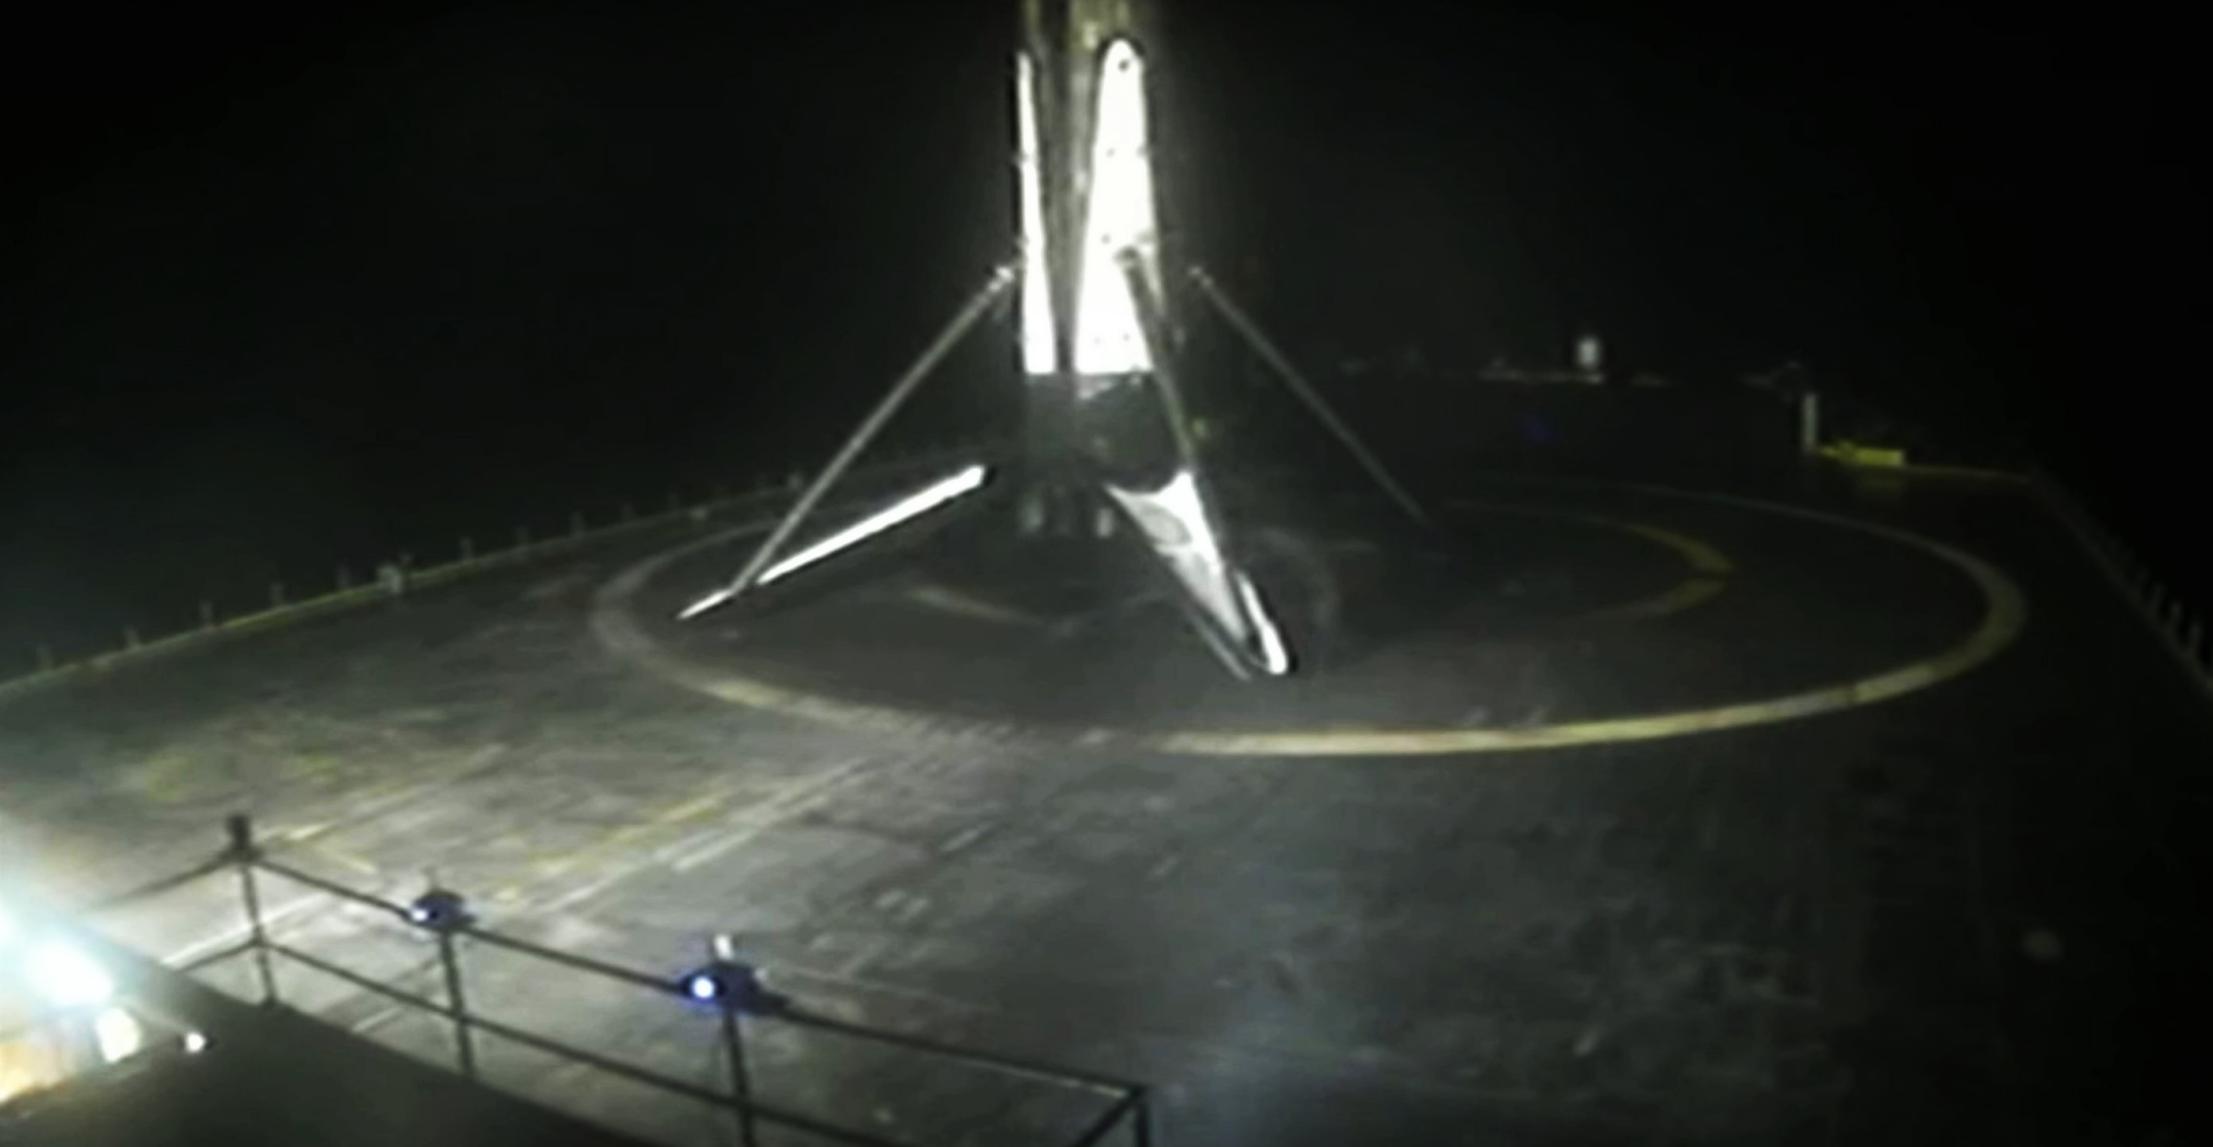 Starlink-2 Falcon 9 B1049 webcast (SpaceX) OCISLY landing 2 (c)